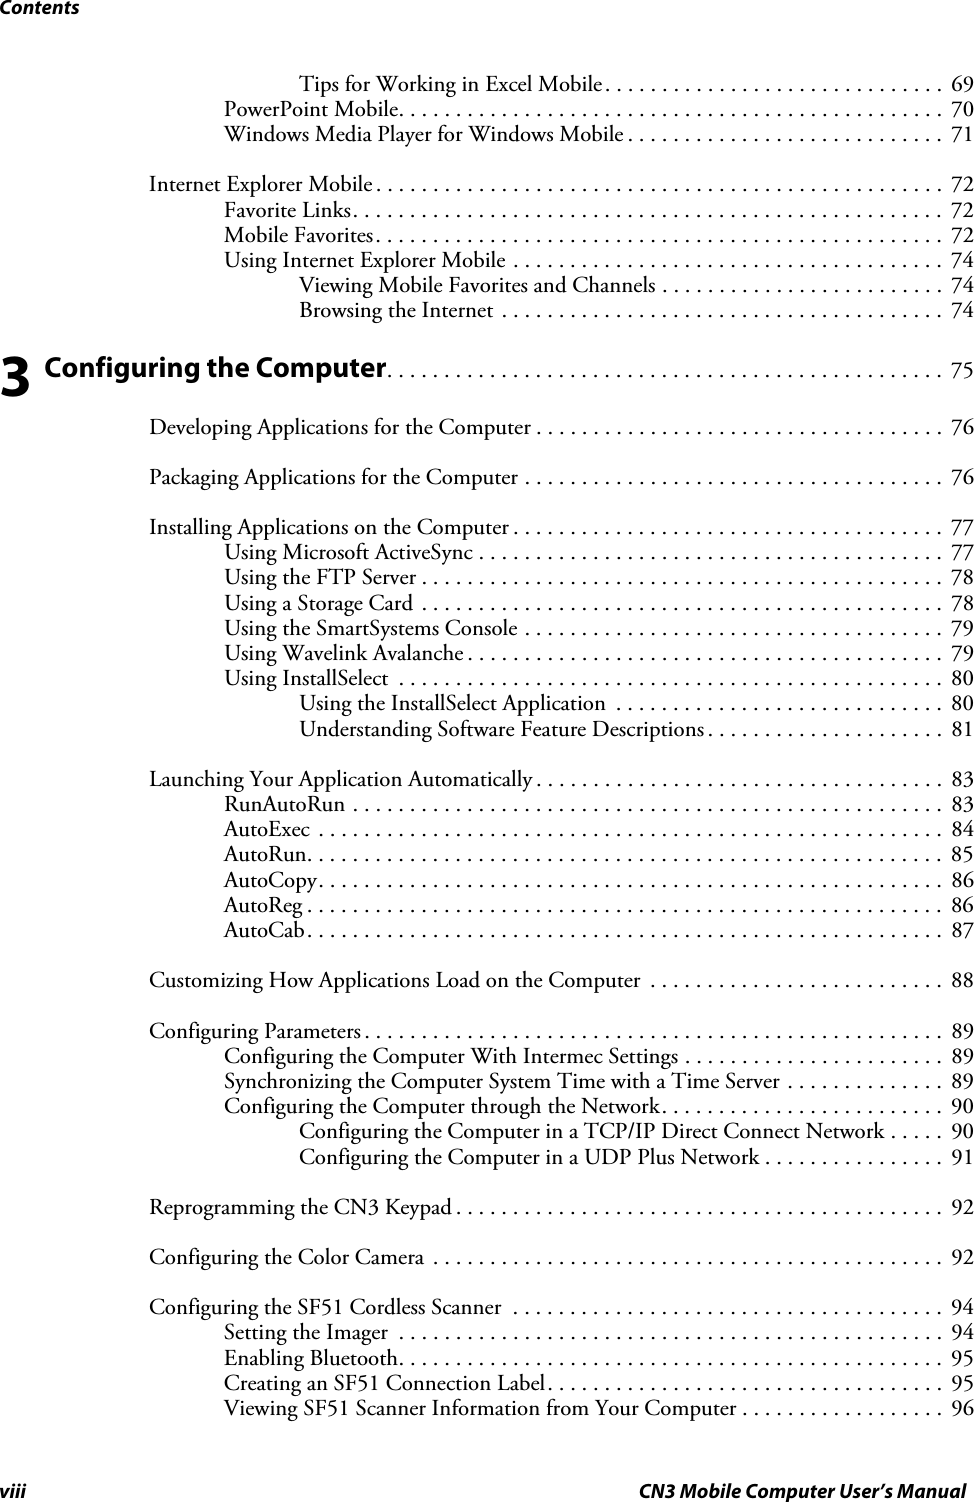 Contentsviii CN3 Mobile Computer User’s ManualTips for Working in Excel Mobile. . . . . . . . . . . . . . . . . . . . . . . . . . . . . .  69PowerPoint Mobile. . . . . . . . . . . . . . . . . . . . . . . . . . . . . . . . . . . . . . . . . . . . . . . .  70Windows Media Player for Windows Mobile . . . . . . . . . . . . . . . . . . . . . . . . . . . .  71Internet Explorer Mobile . . . . . . . . . . . . . . . . . . . . . . . . . . . . . . . . . . . . . . . . . . . . . . . . . .  72Favorite Links. . . . . . . . . . . . . . . . . . . . . . . . . . . . . . . . . . . . . . . . . . . . . . . . . . . .  72Mobile Favorites. . . . . . . . . . . . . . . . . . . . . . . . . . . . . . . . . . . . . . . . . . . . . . . . . .  72Using Internet Explorer Mobile . . . . . . . . . . . . . . . . . . . . . . . . . . . . . . . . . . . . . .  74Viewing Mobile Favorites and Channels . . . . . . . . . . . . . . . . . . . . . . . . .  74Browsing the Internet . . . . . . . . . . . . . . . . . . . . . . . . . . . . . . . . . . . . . . .  743 Configuring the Computer. . . . . . . . . . . . . . . . . . . . . . . . . . . . . . . . . . . . . . . . . . . . . . . . .  75Developing Applications for the Computer . . . . . . . . . . . . . . . . . . . . . . . . . . . . . . . . . . . .  76Packaging Applications for the Computer . . . . . . . . . . . . . . . . . . . . . . . . . . . . . . . . . . . . .  76Installing Applications on the Computer . . . . . . . . . . . . . . . . . . . . . . . . . . . . . . . . . . . . . .  77Using Microsoft ActiveSync . . . . . . . . . . . . . . . . . . . . . . . . . . . . . . . . . . . . . . . . .  77Using the FTP Server . . . . . . . . . . . . . . . . . . . . . . . . . . . . . . . . . . . . . . . . . . . . . .  78Using a Storage Card . . . . . . . . . . . . . . . . . . . . . . . . . . . . . . . . . . . . . . . . . . . . . .  78Using the SmartSystems Console . . . . . . . . . . . . . . . . . . . . . . . . . . . . . . . . . . . . .  79Using Wavelink Avalanche . . . . . . . . . . . . . . . . . . . . . . . . . . . . . . . . . . . . . . . . . .  79Using InstallSelect  . . . . . . . . . . . . . . . . . . . . . . . . . . . . . . . . . . . . . . . . . . . . . . . .  80Using the InstallSelect Application  . . . . . . . . . . . . . . . . . . . . . . . . . . . . .  80Understanding Software Feature Descriptions . . . . . . . . . . . . . . . . . . . . .  81Launching Your Application Automatically . . . . . . . . . . . . . . . . . . . . . . . . . . . . . . . . . . . .  83RunAutoRun . . . . . . . . . . . . . . . . . . . . . . . . . . . . . . . . . . . . . . . . . . . . . . . . . . . .  83AutoExec  . . . . . . . . . . . . . . . . . . . . . . . . . . . . . . . . . . . . . . . . . . . . . . . . . . . . . . .  84AutoRun. . . . . . . . . . . . . . . . . . . . . . . . . . . . . . . . . . . . . . . . . . . . . . . . . . . . . . . .  85AutoCopy. . . . . . . . . . . . . . . . . . . . . . . . . . . . . . . . . . . . . . . . . . . . . . . . . . . . . . .  86AutoReg . . . . . . . . . . . . . . . . . . . . . . . . . . . . . . . . . . . . . . . . . . . . . . . . . . . . . . . .  86AutoCab. . . . . . . . . . . . . . . . . . . . . . . . . . . . . . . . . . . . . . . . . . . . . . . . . . . . . . . .  87Customizing How Applications Load on the Computer  . . . . . . . . . . . . . . . . . . . . . . . . . .  88Configuring Parameters . . . . . . . . . . . . . . . . . . . . . . . . . . . . . . . . . . . . . . . . . . . . . . . . . . .  89Configuring the Computer With Intermec Settings . . . . . . . . . . . . . . . . . . . . . . .  89Synchronizing the Computer System Time with a Time Server . . . . . . . . . . . . . .  89Configuring the Computer through the Network. . . . . . . . . . . . . . . . . . . . . . . . .  90Configuring the Computer in a TCP/IP Direct Connect Network . . . . .  90Configuring the Computer in a UDP Plus Network . . . . . . . . . . . . . . . .  91Reprogramming the CN3 Keypad . . . . . . . . . . . . . . . . . . . . . . . . . . . . . . . . . . . . . . . . . . .  92Configuring the Color Camera . . . . . . . . . . . . . . . . . . . . . . . . . . . . . . . . . . . . . . . . . . . . .  92Configuring the SF51 Cordless Scanner  . . . . . . . . . . . . . . . . . . . . . . . . . . . . . . . . . . . . . .  94Setting the Imager  . . . . . . . . . . . . . . . . . . . . . . . . . . . . . . . . . . . . . . . . . . . . . . . .  94Enabling Bluetooth. . . . . . . . . . . . . . . . . . . . . . . . . . . . . . . . . . . . . . . . . . . . . . . .  95Creating an SF51 Connection Label. . . . . . . . . . . . . . . . . . . . . . . . . . . . . . . . . . .  95Viewing SF51 Scanner Information from Your Computer . . . . . . . . . . . . . . . . . .  96